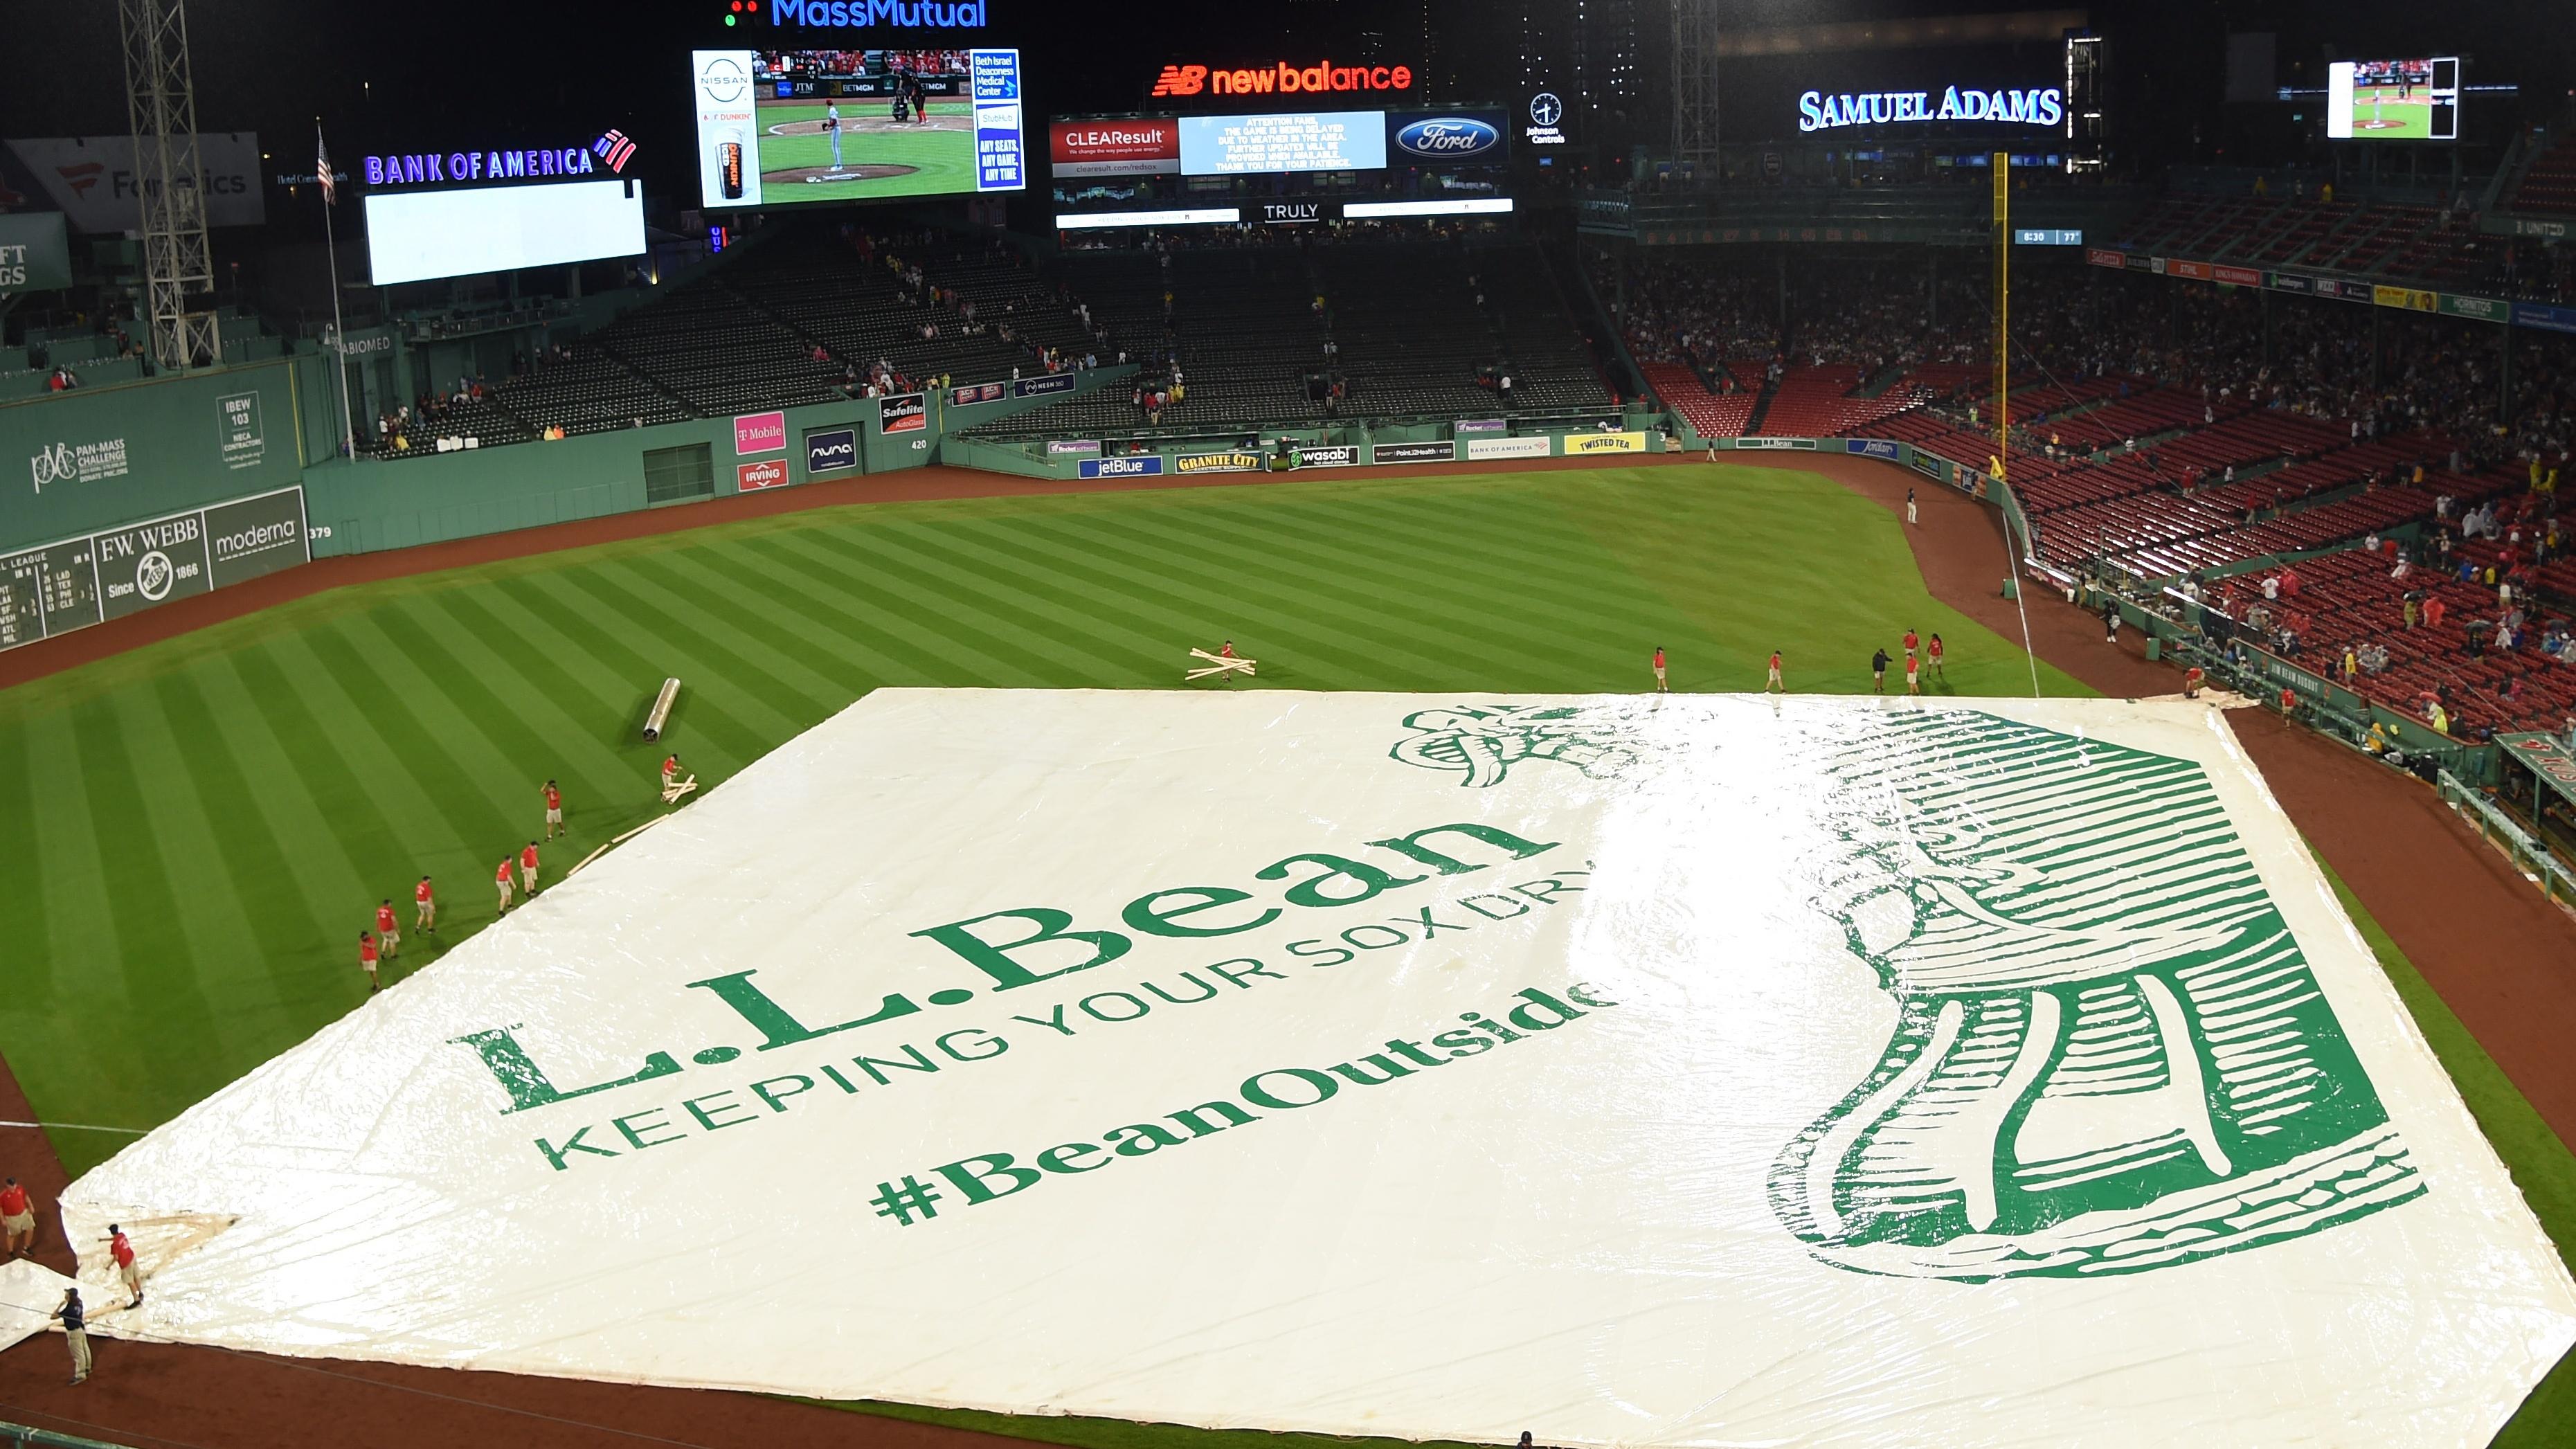 The Boston Red Sox grounds crew puts the tarp on the field during the fourth inning against the New York Mets at Fenway Park / Bob DeChiara - USA TODAY Sports